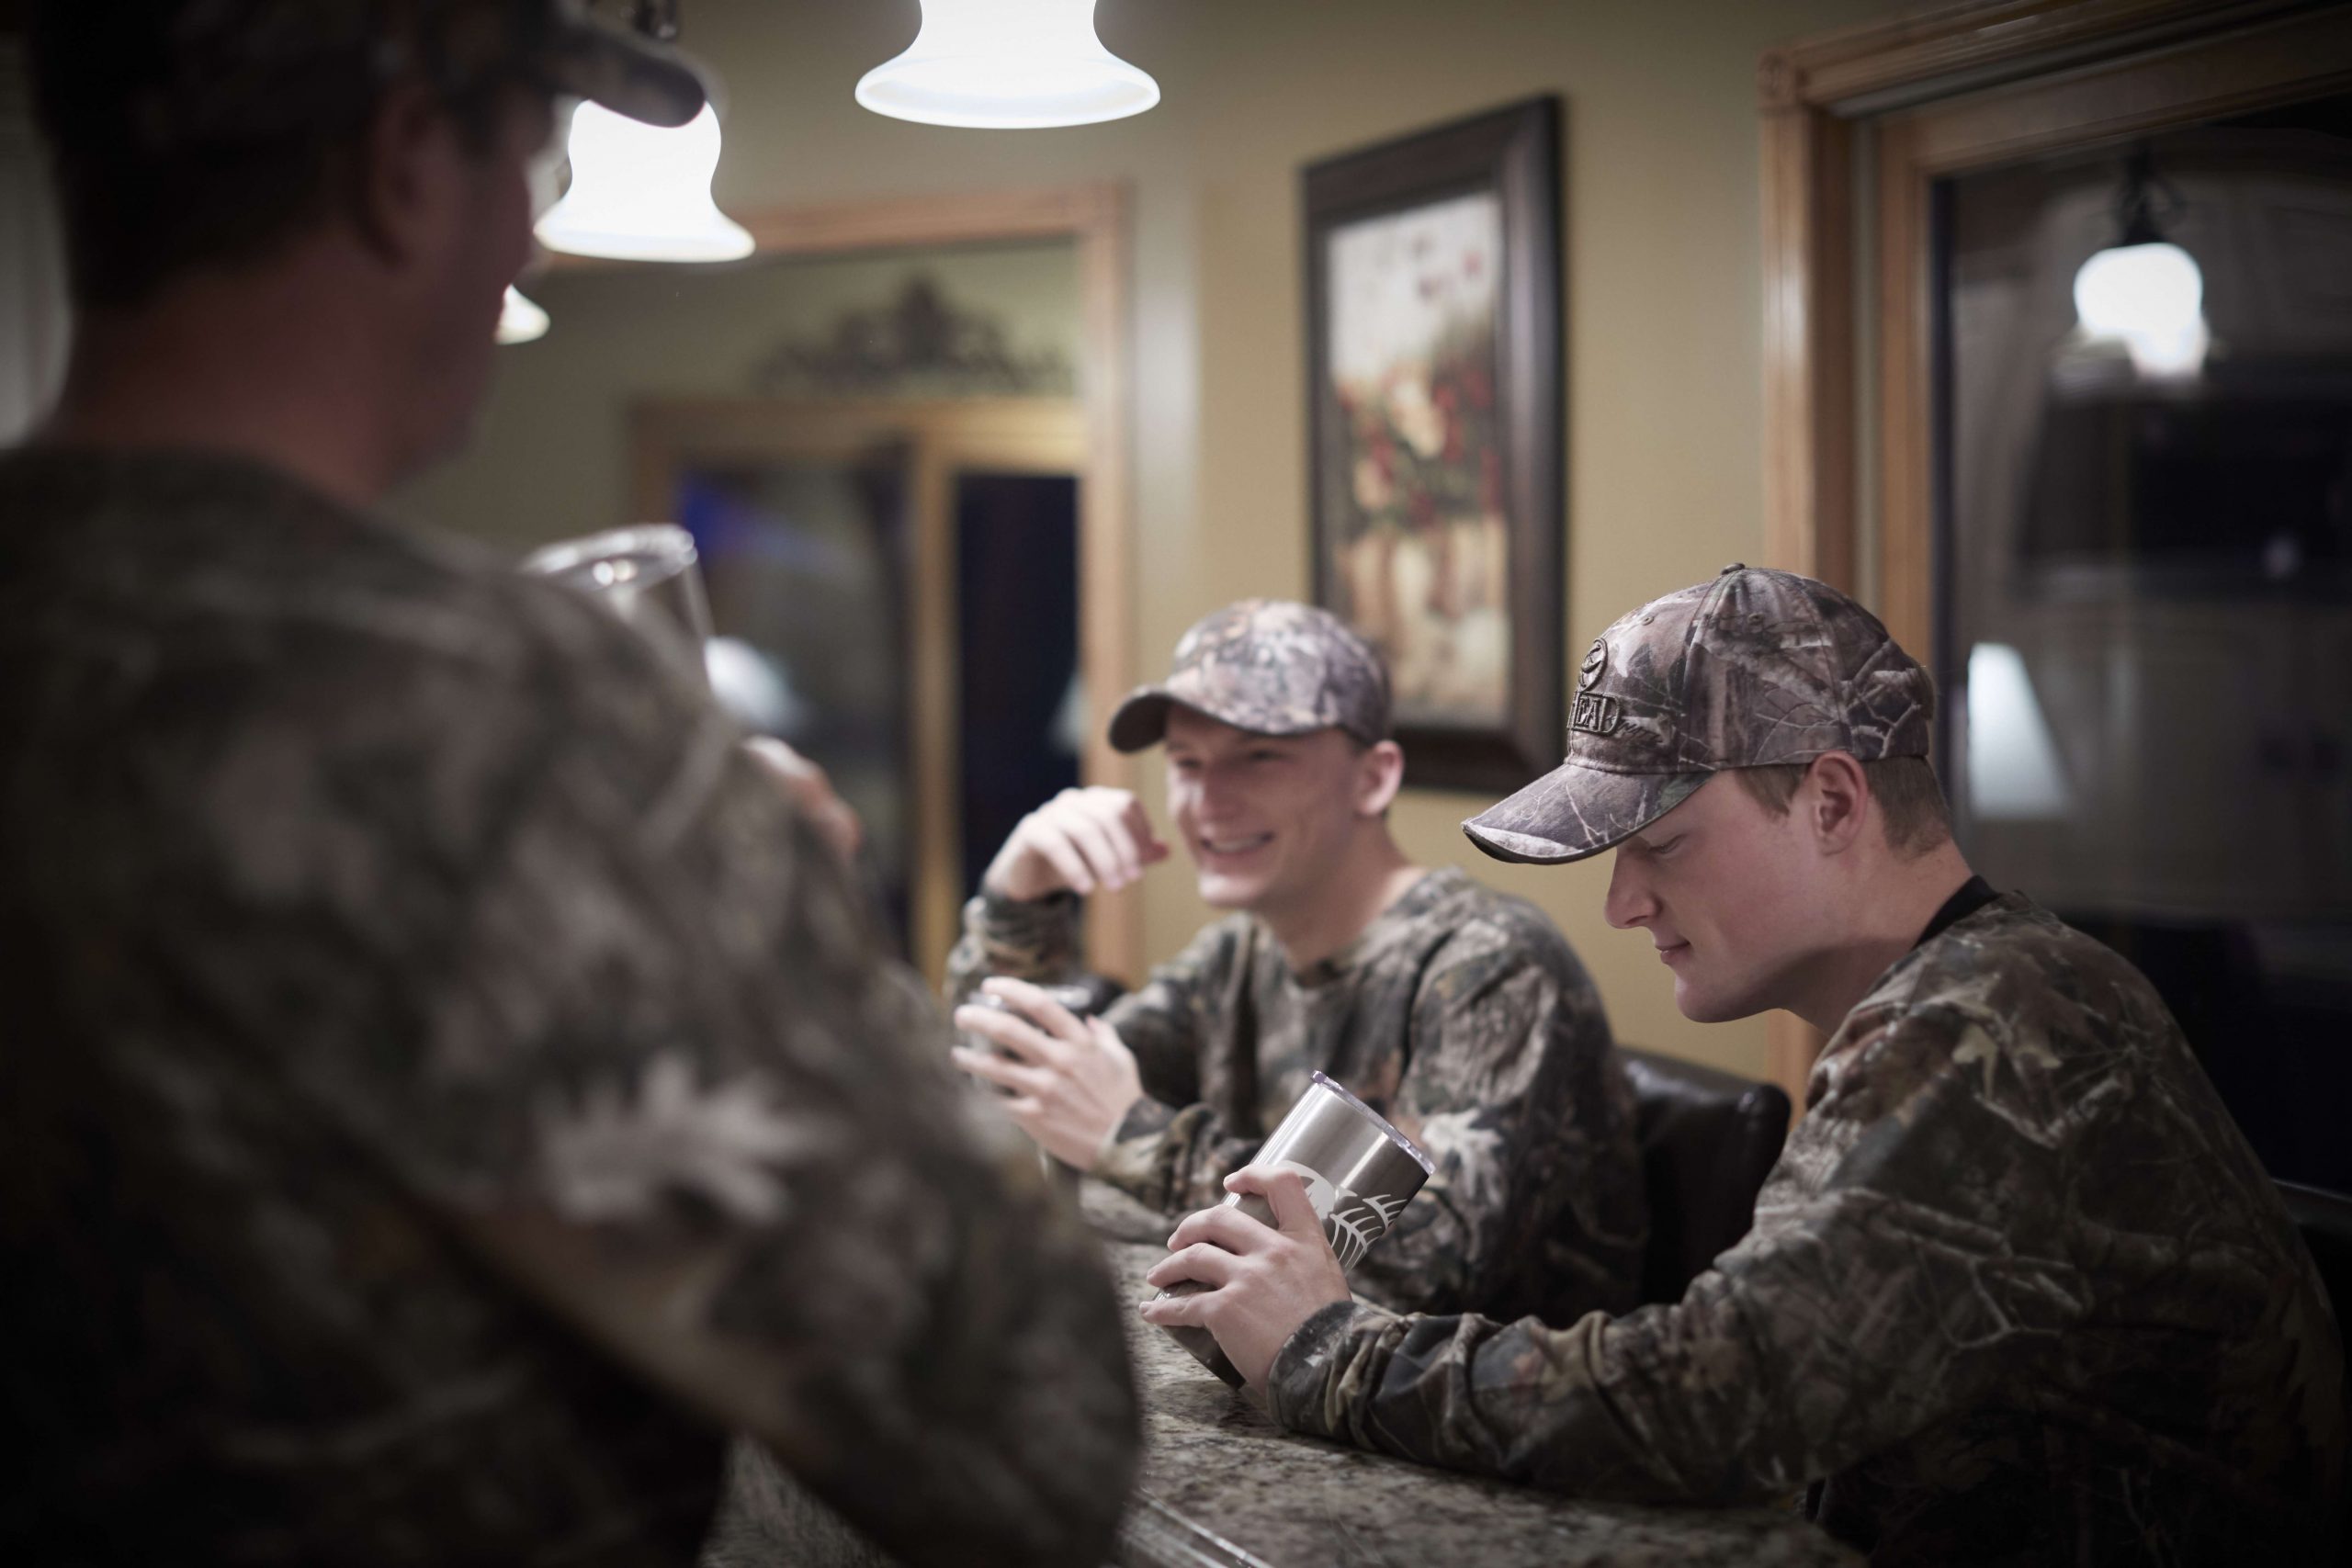 Hunting provides a bonding experience for the three men, as well as a bit of competition. Jackson and Nicholas discuss which stands to go to based on what has been showing up on the trail cameras.